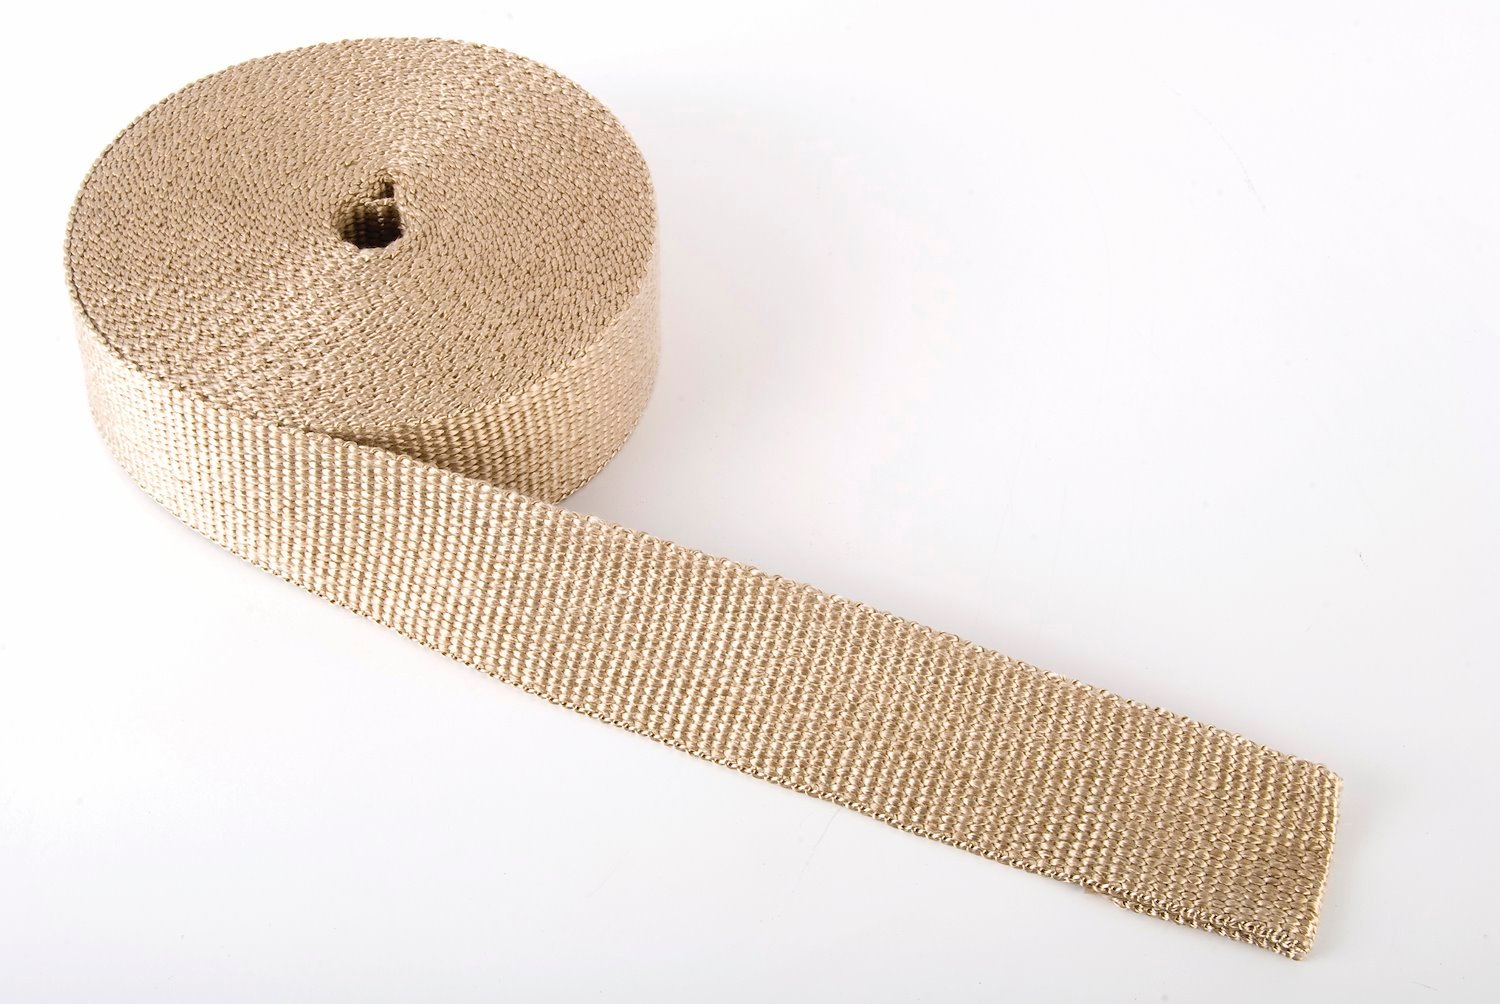 Exhaust & Header Wrap 2 in. x 50 ft. x 1/16 in. Thick